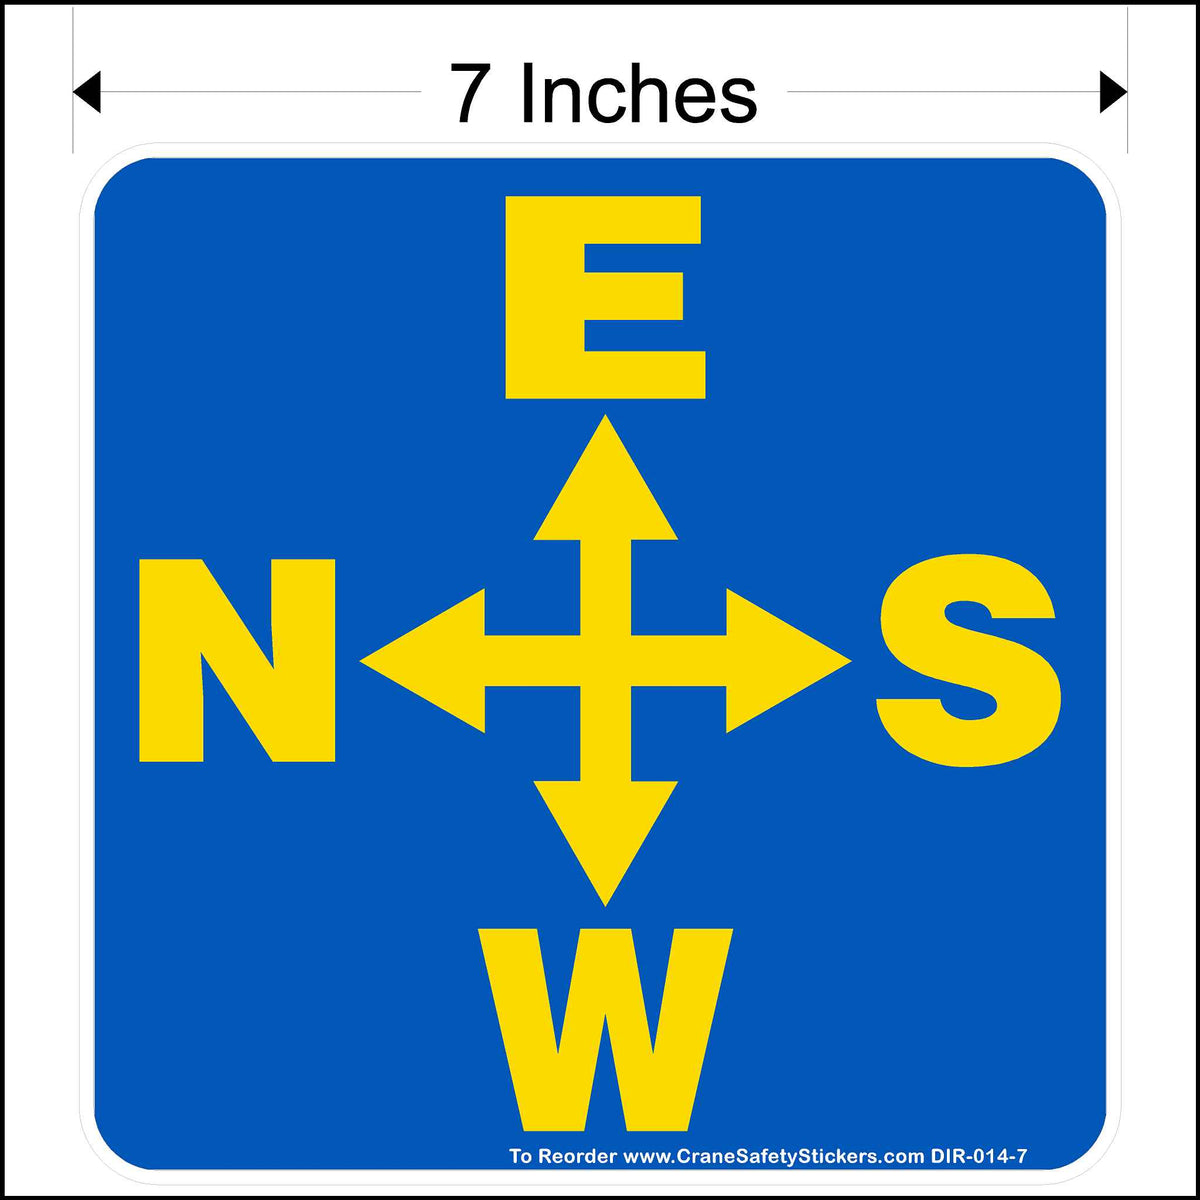 7 Inch overhead crane directional decal. Printed with yellow East, South, West, and North Arrows on a blue background.